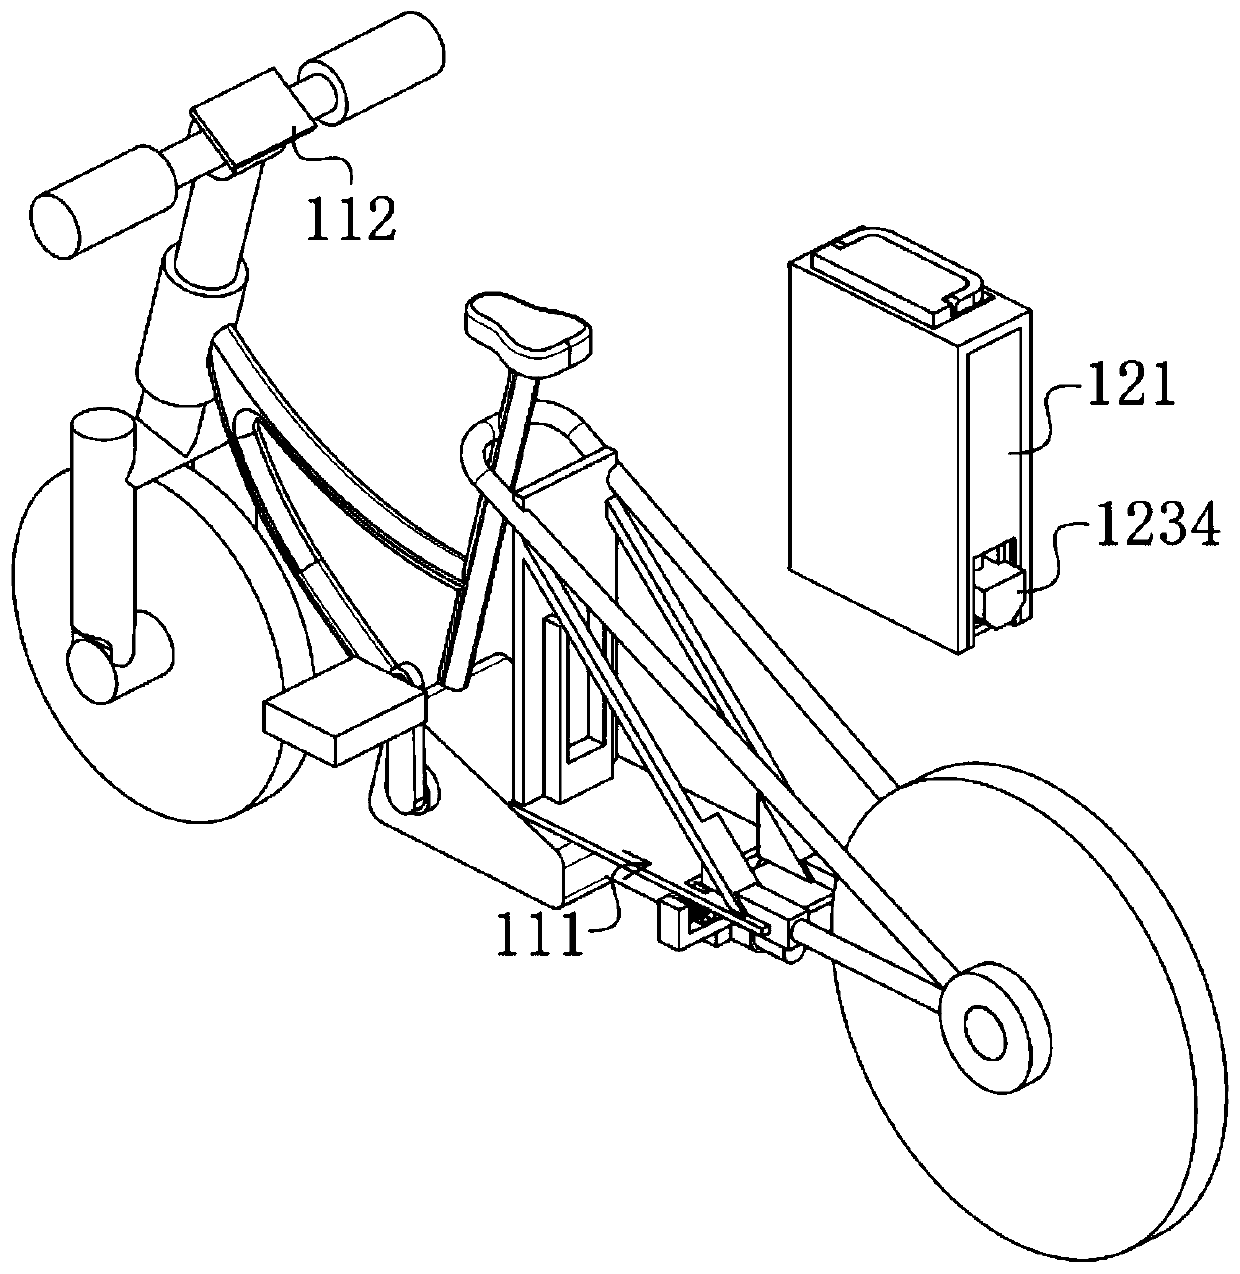 Locking mechanism for electric bicycle